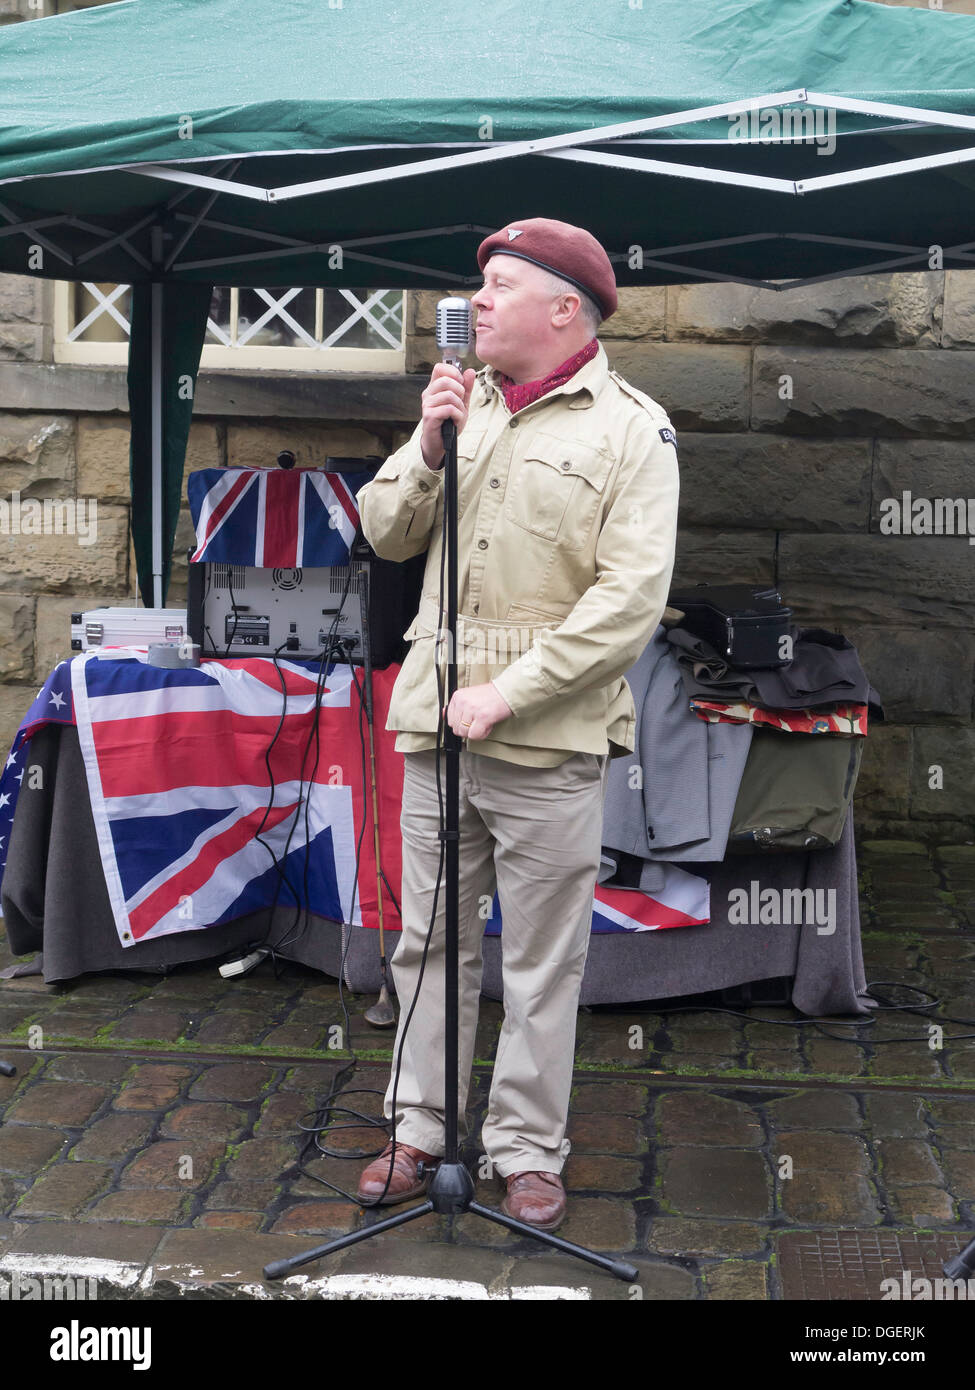 A man dressed as a paratrooper compère of music on Goathland Station NYMR during the Railway in Wartime week-end October 2013 Stock Photo